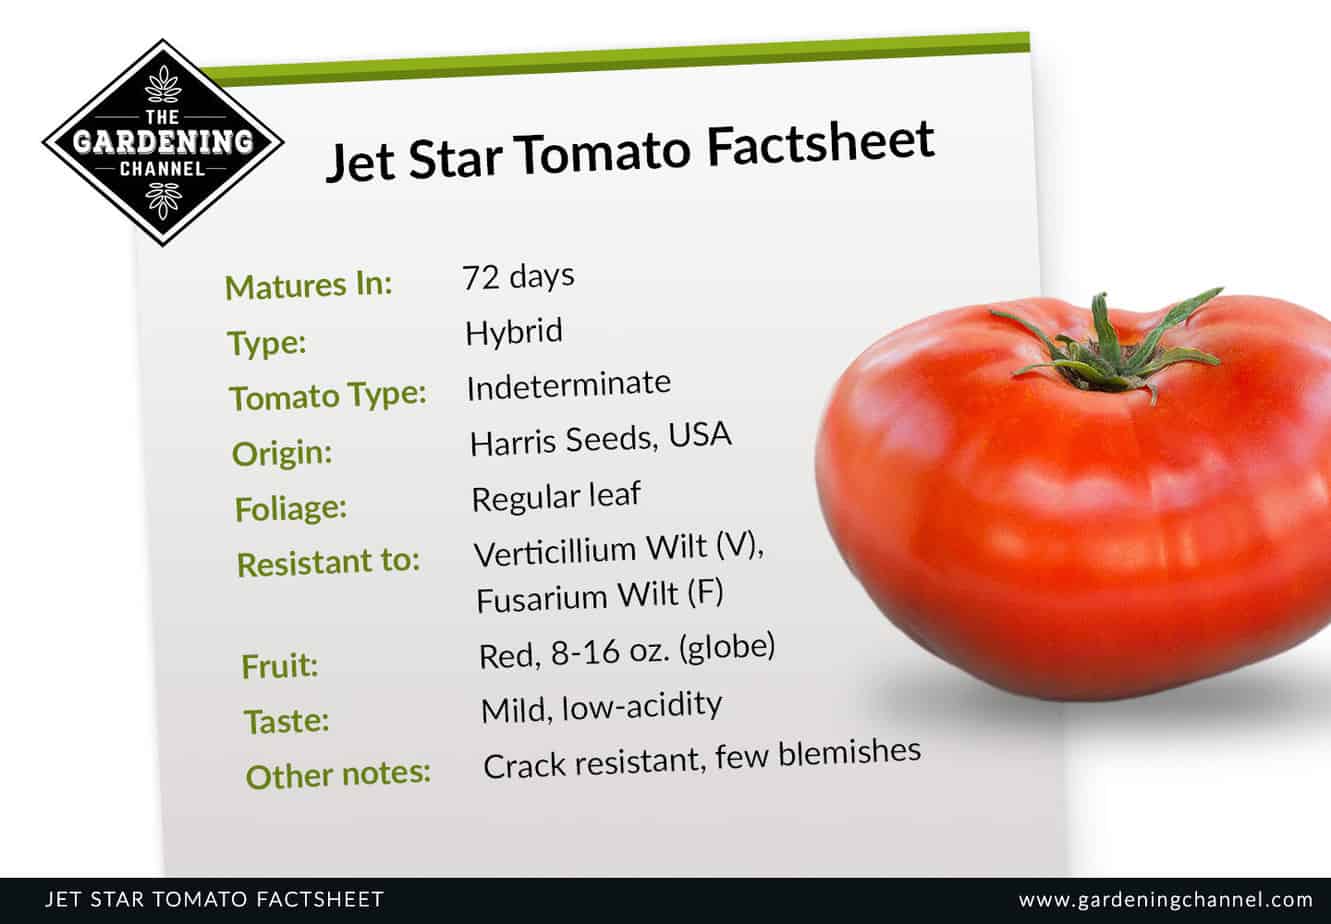 ‌‌What‌ ‌You‌ ‌Might‌ ‌Not‌ ‌Know‌ ‌About‌ ‌the‌ ‌Jet‌ ‌Star‌ ‌Tomato‌